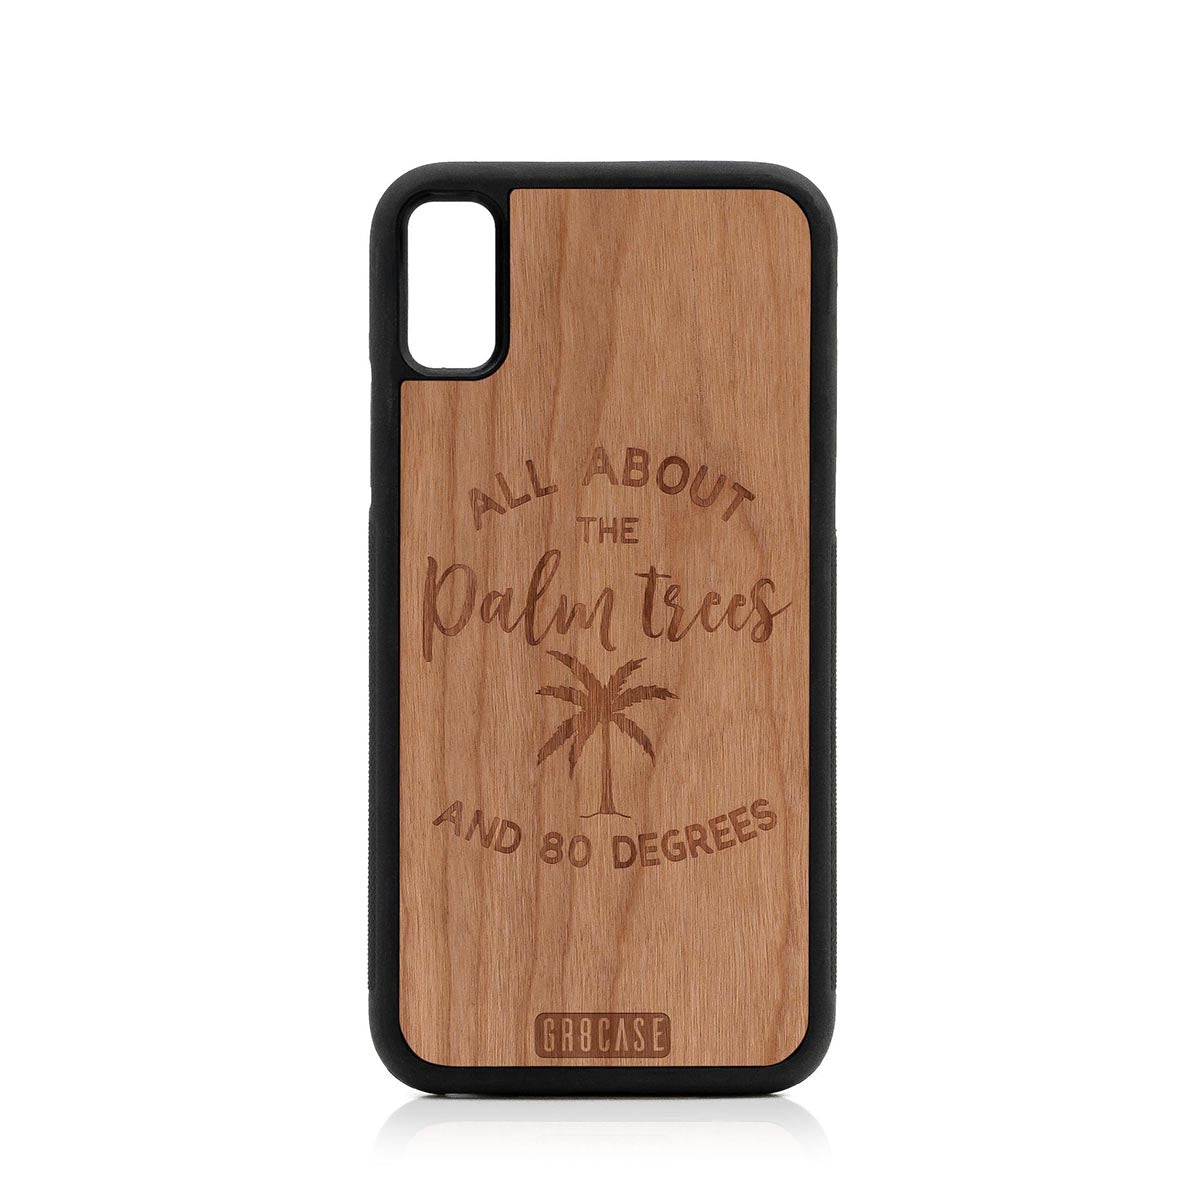 All About The Palm Trees and 80 Degrees Design Wood Case For iPhone X/XS by GR8CASE